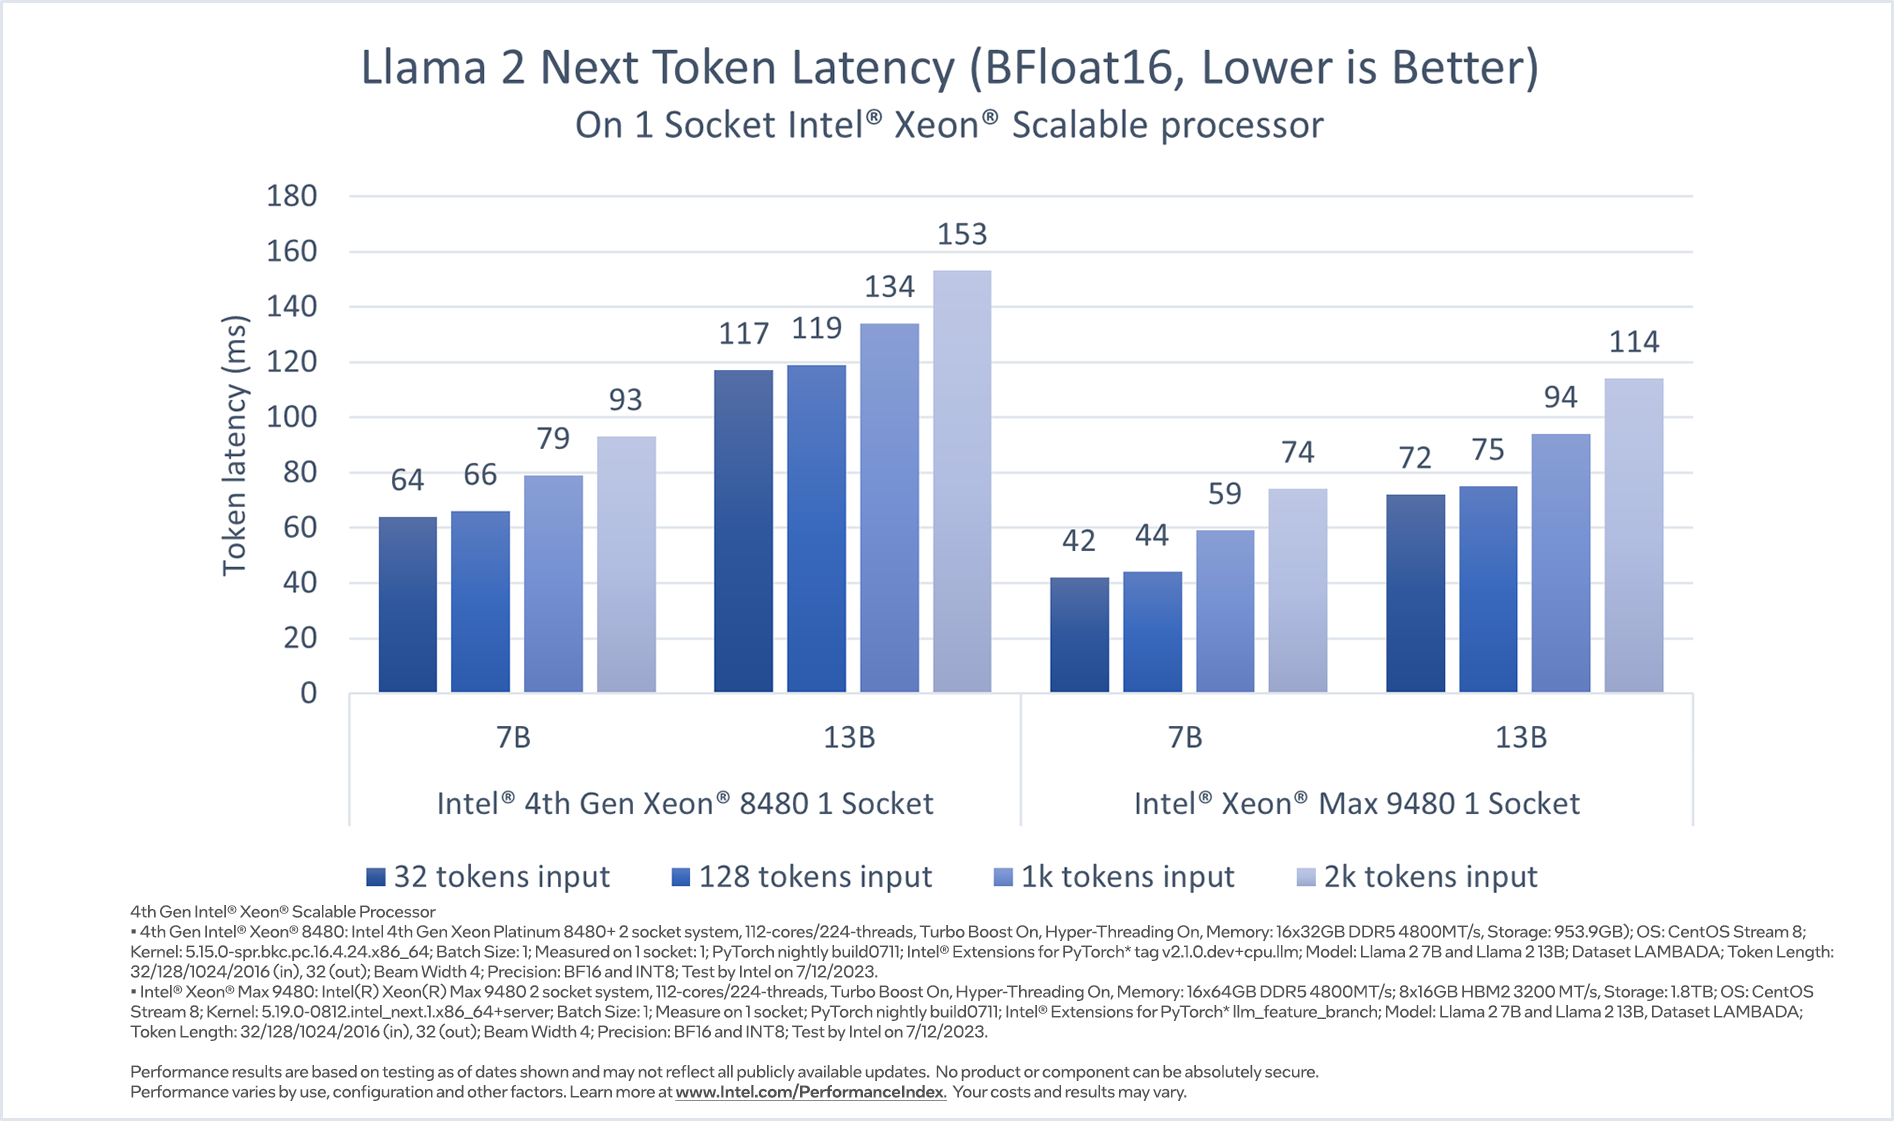 Llama 2 7B and 13B inference (BFloat16) performance on Intel Xeon Scalable Processor